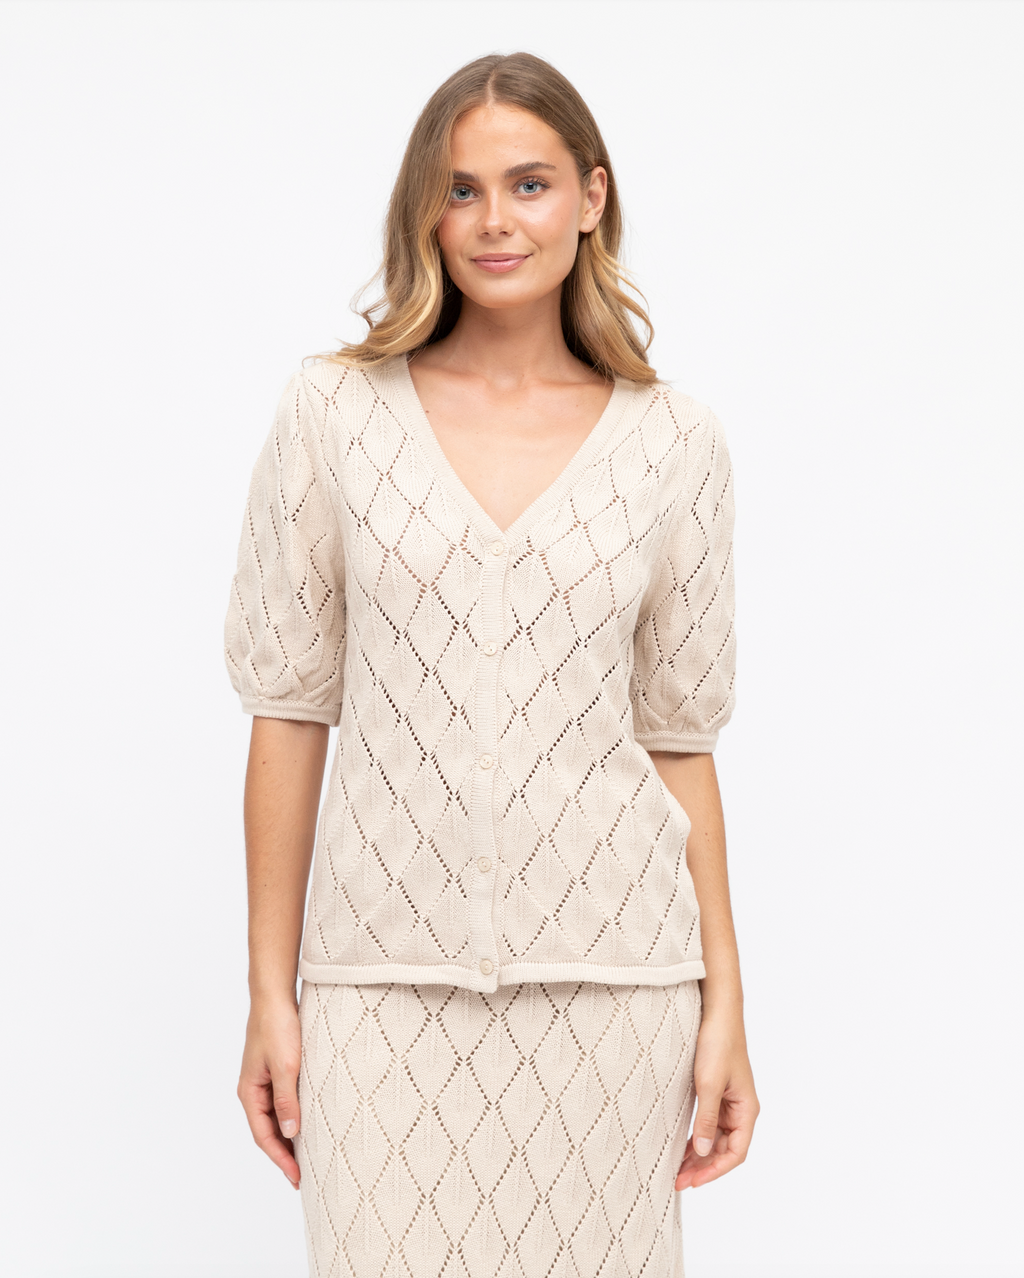 birdie crocheted top by label of love is a beige button up cotton crochet top